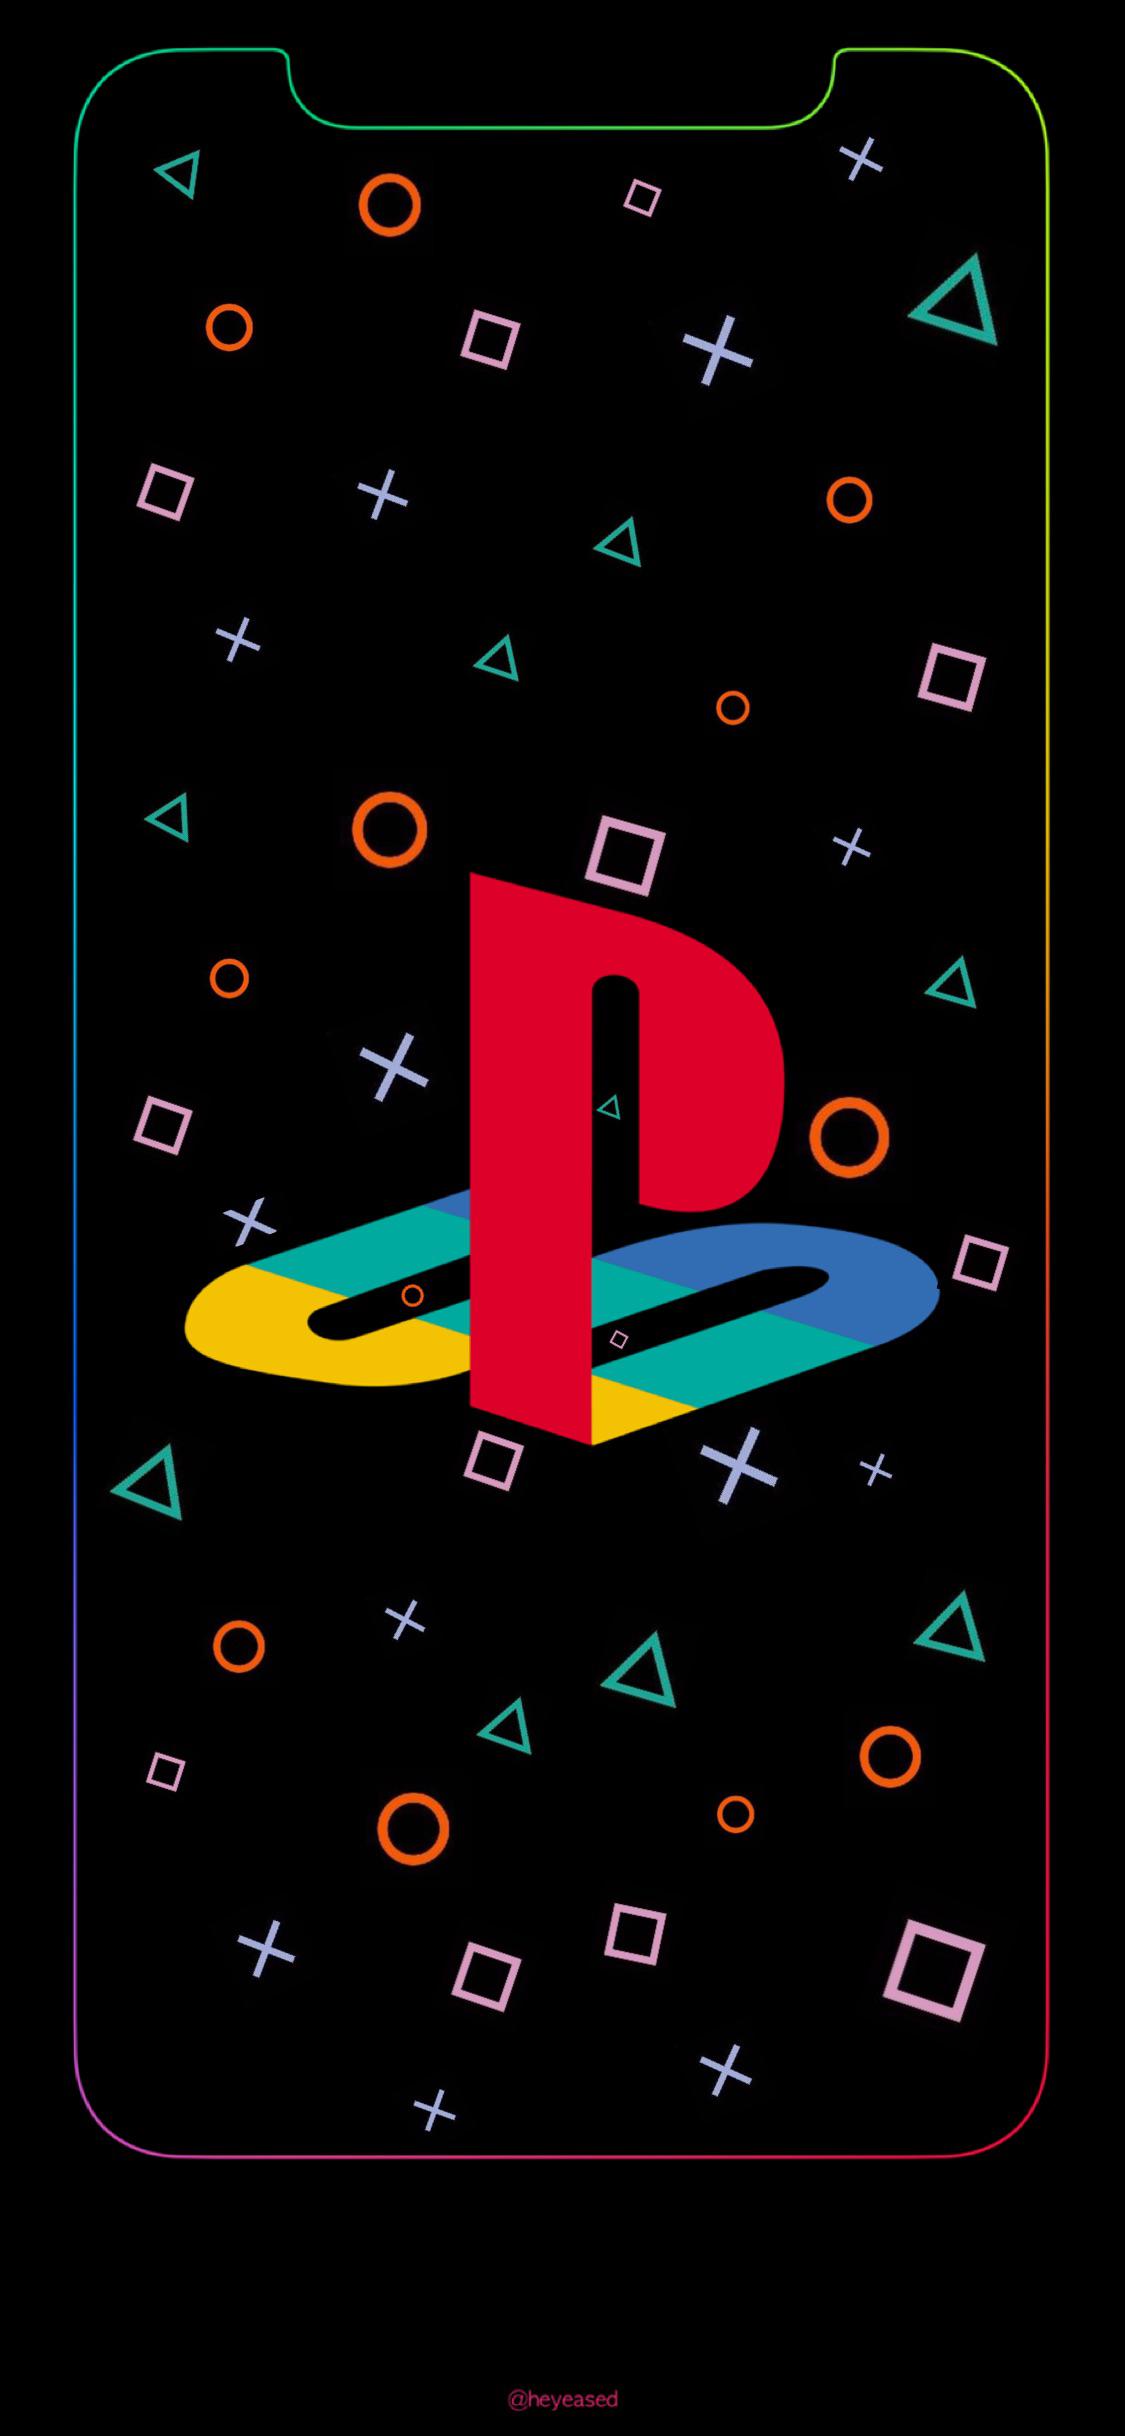 Image A PlayStation wallpaper I made for iPhone X